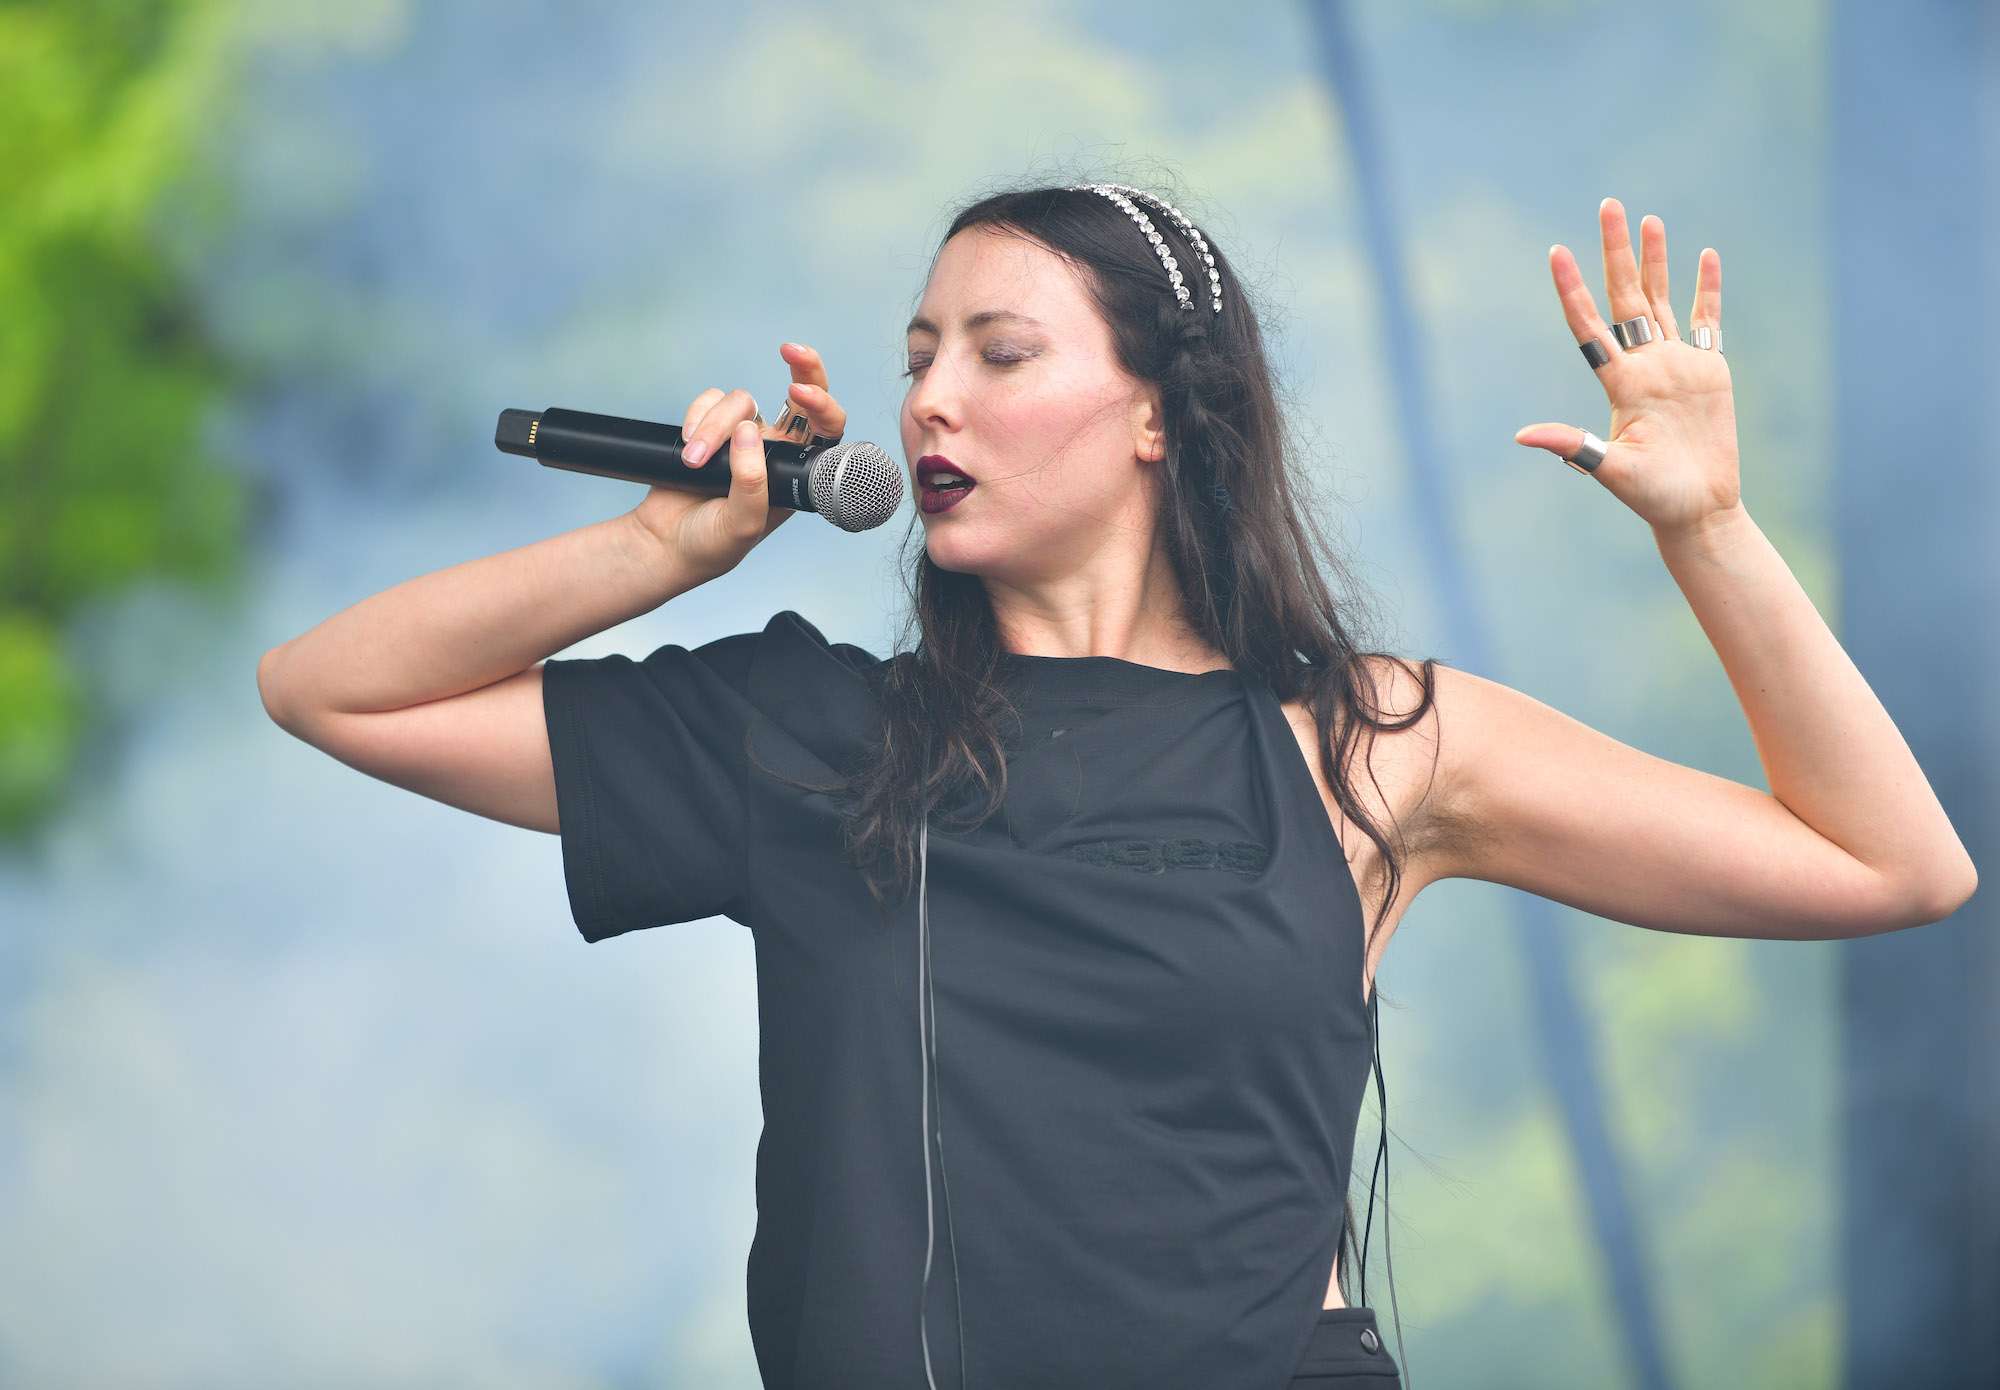 Hyd Live At Pitchfork [GALLERY] 1